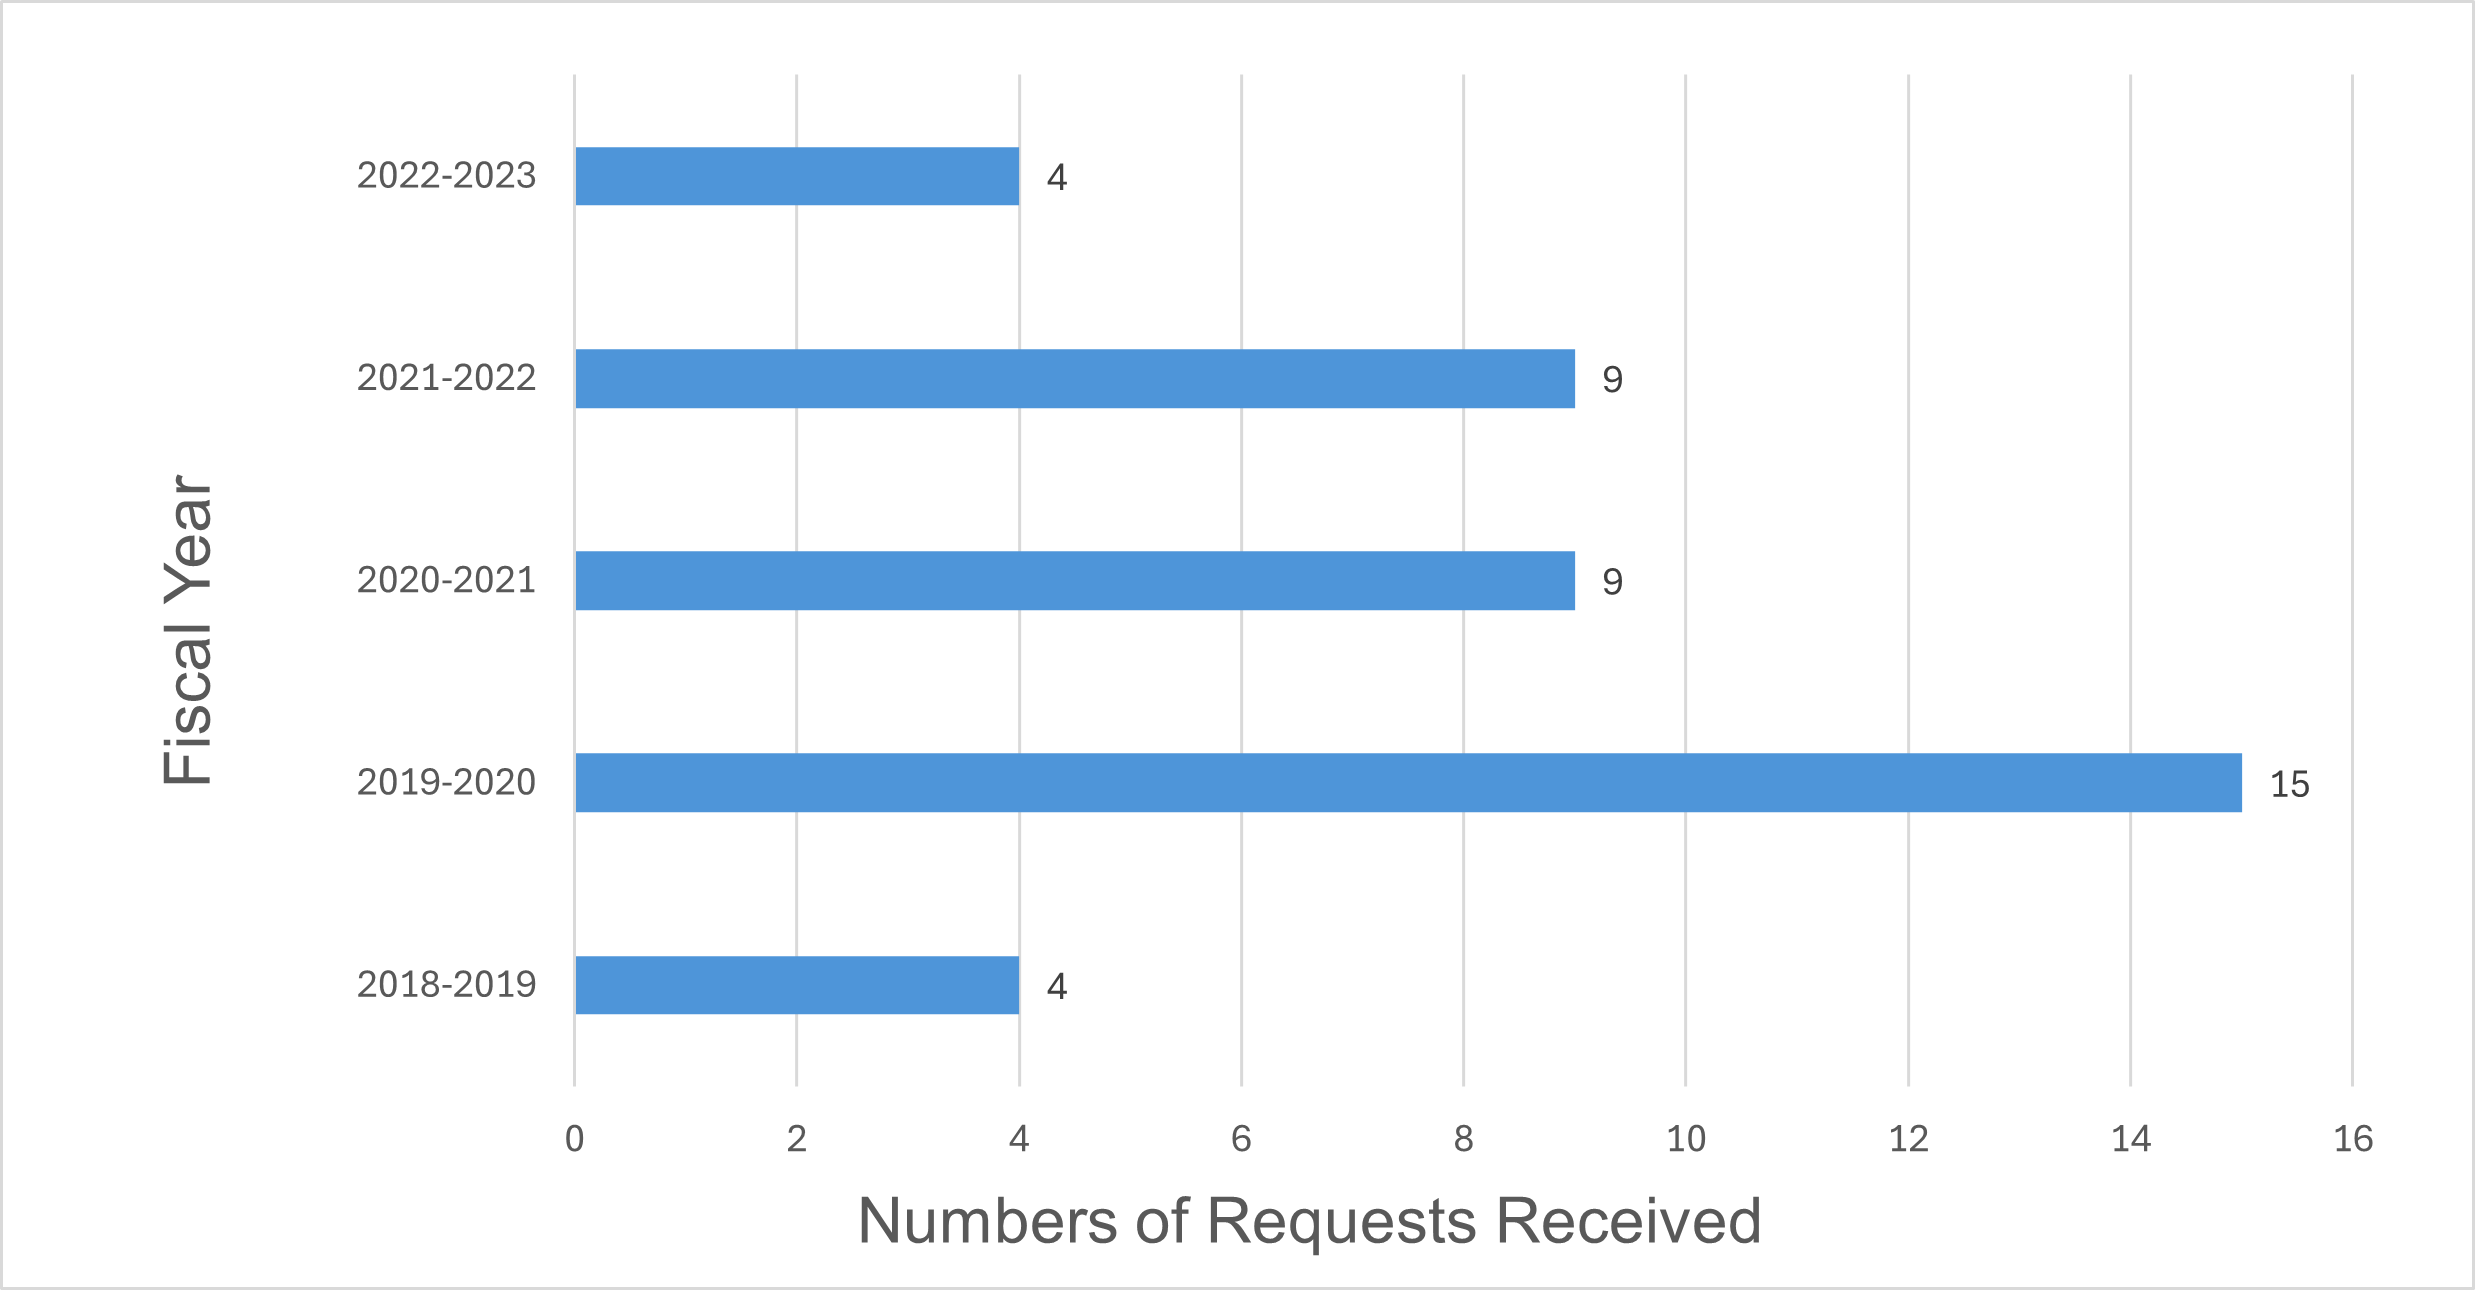 Bar chart presenting the numbers of requests